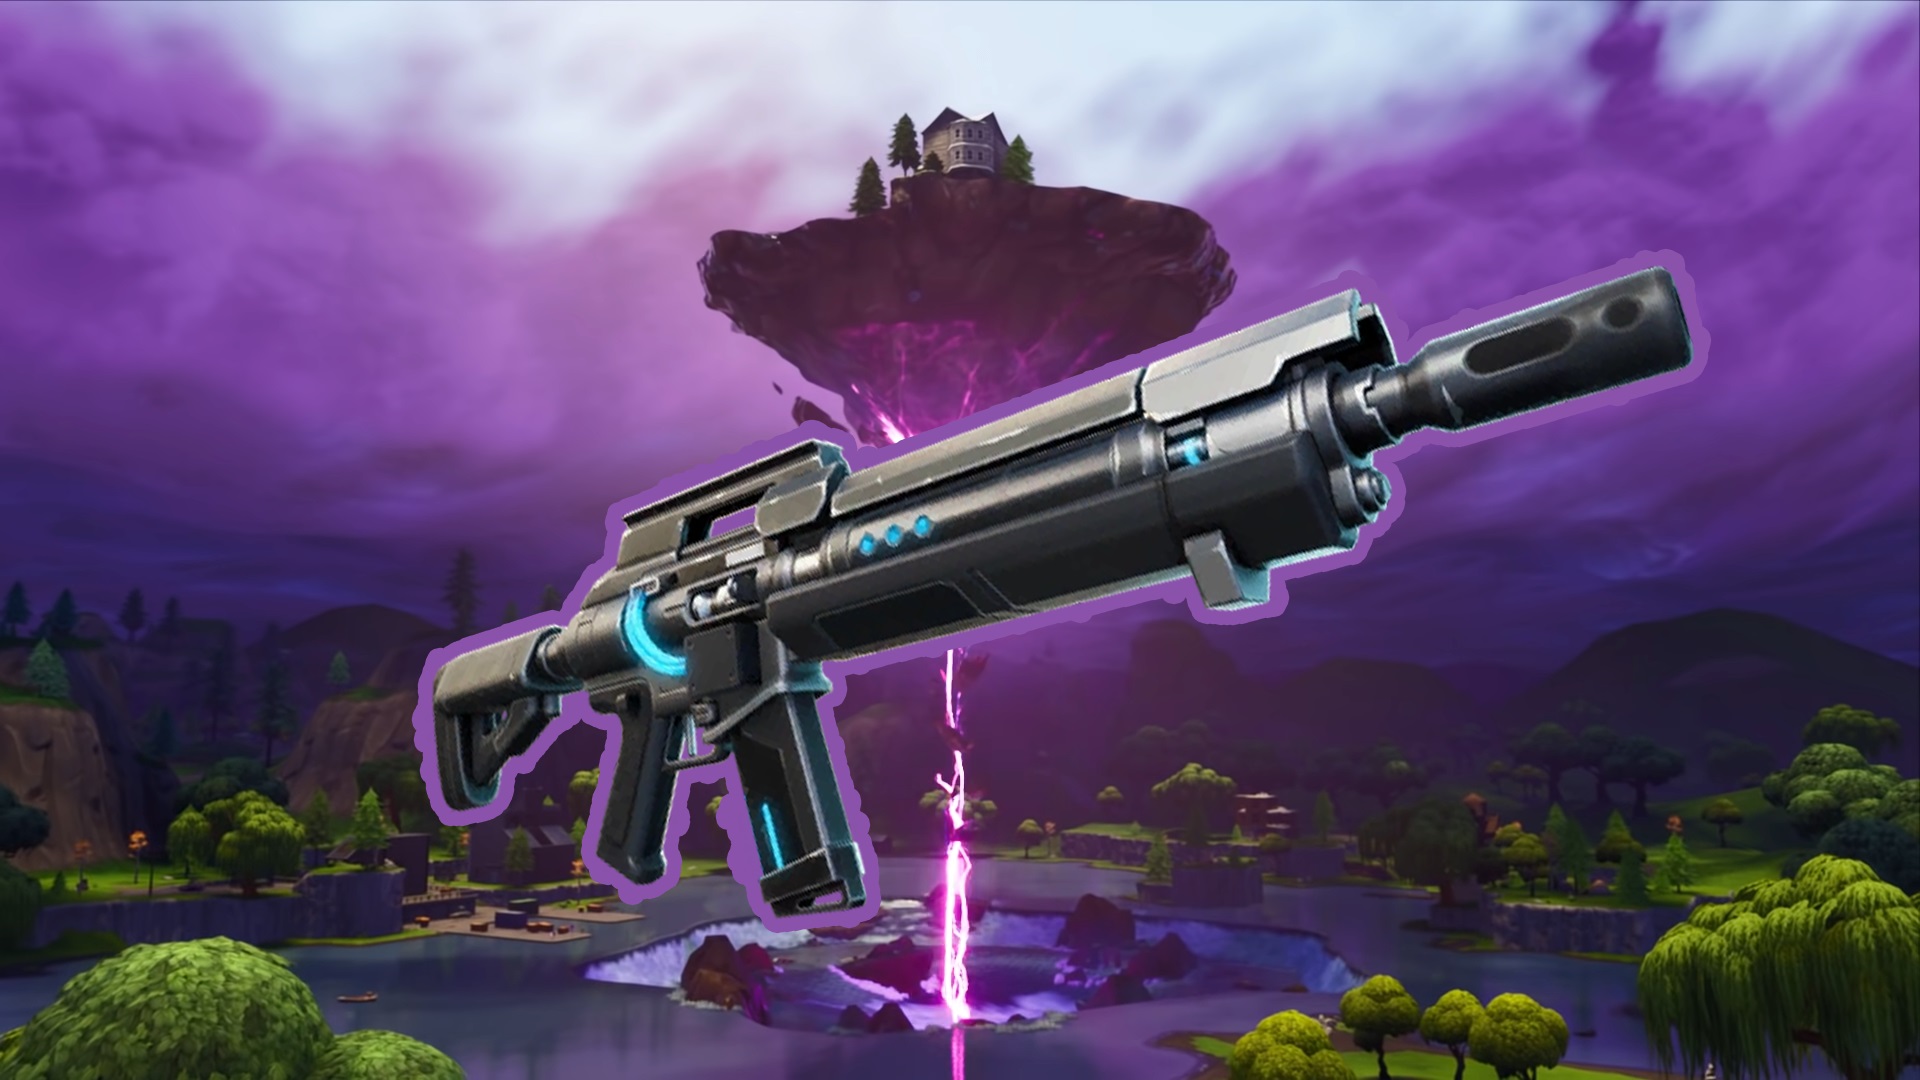 Fortnite players want Sniper Rifles removed